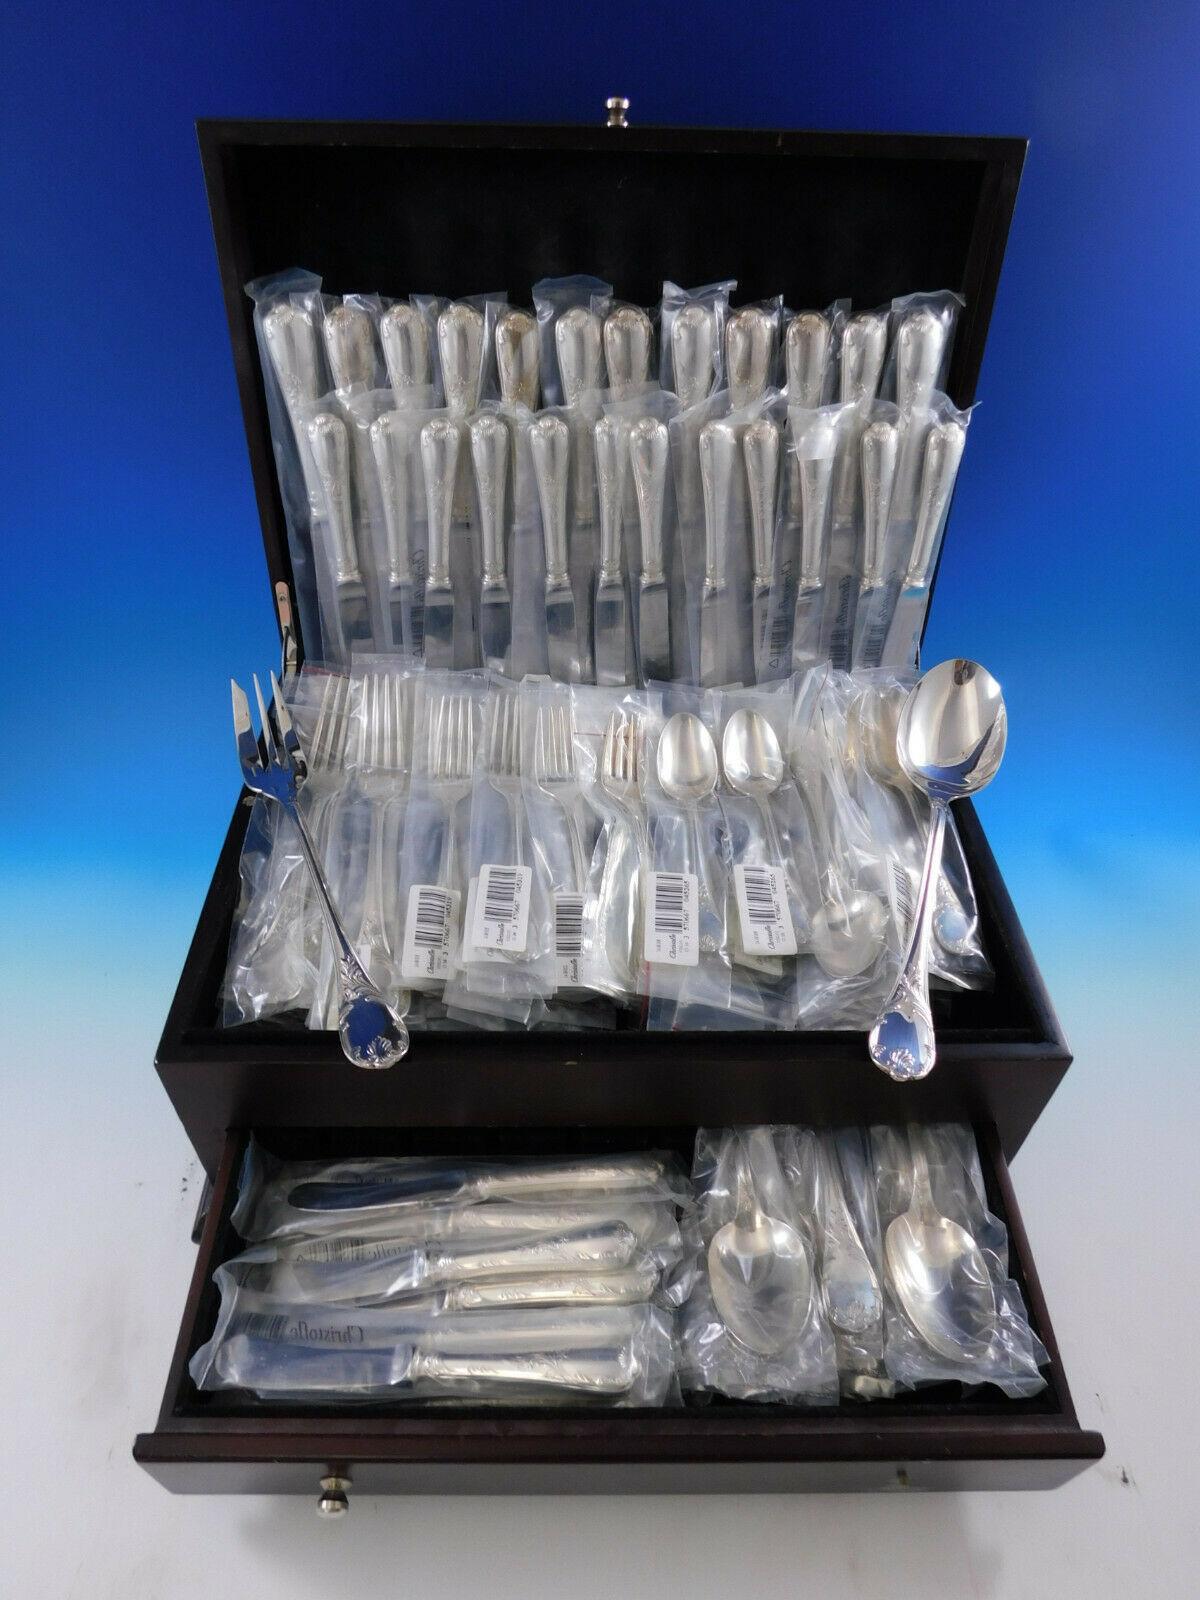 Monumental dinner size Marly by Christofle France silverplate flatware set, 110 pieces. This set includes:

12 dinner size knives, 9 3/4